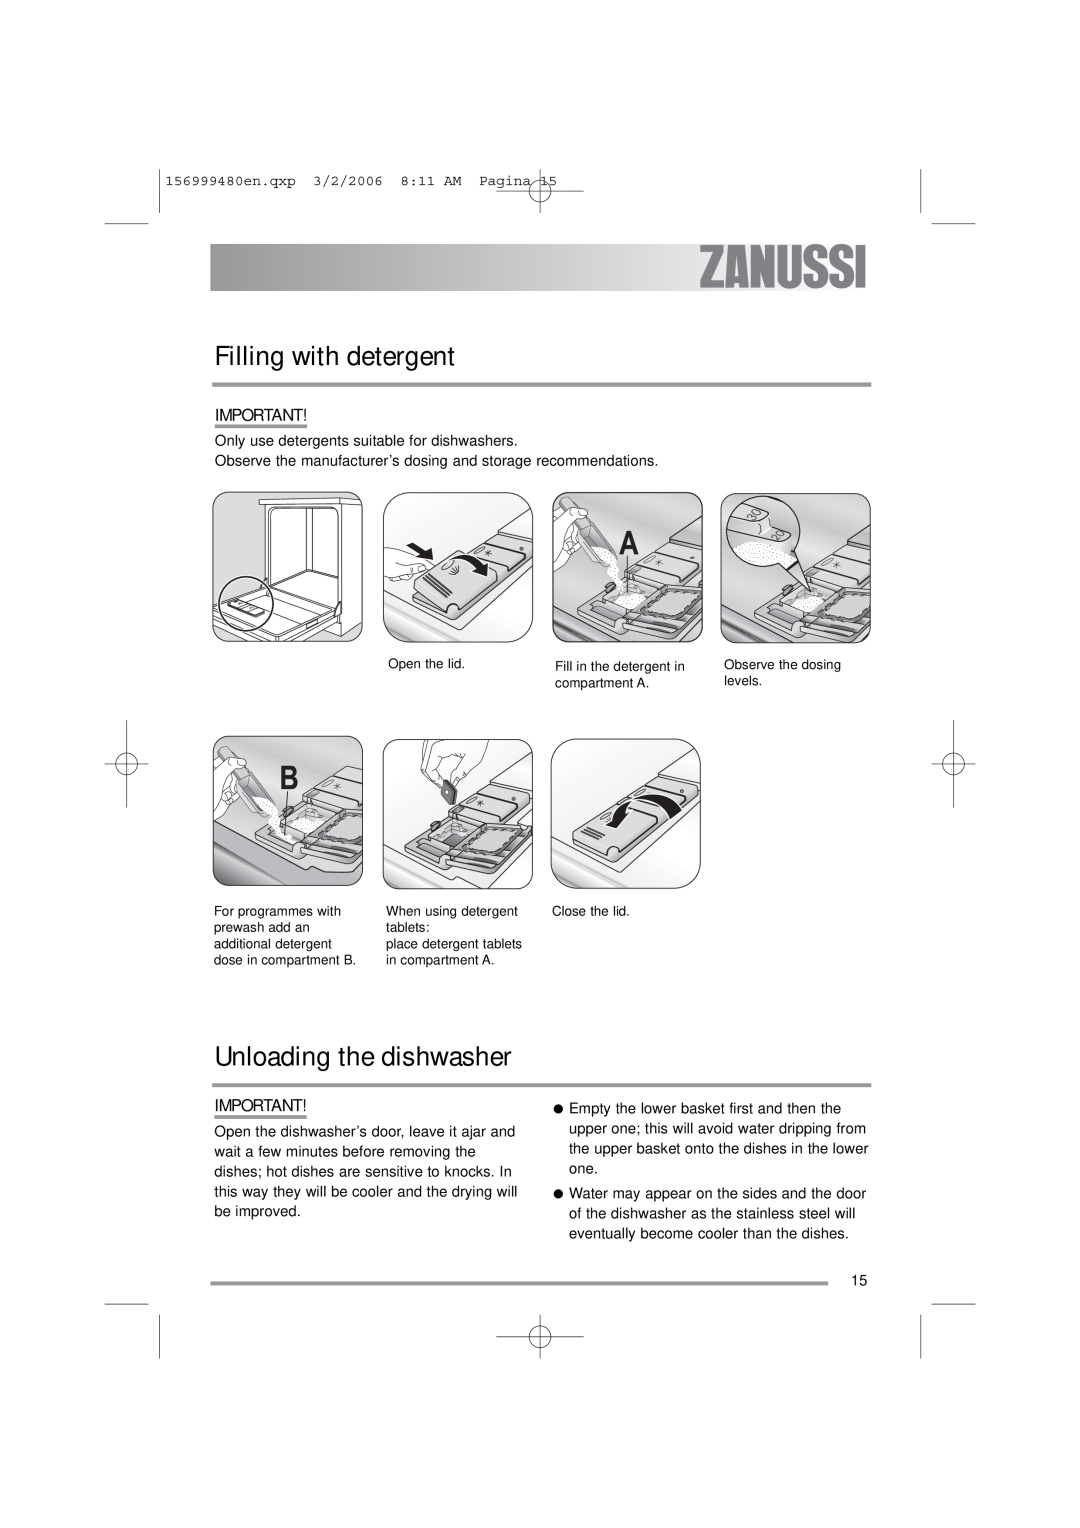 Zanussi ZDF311 user manual Filling with detergent, Unloading the dishwasher, Only use detergents suitable for dishwashers 